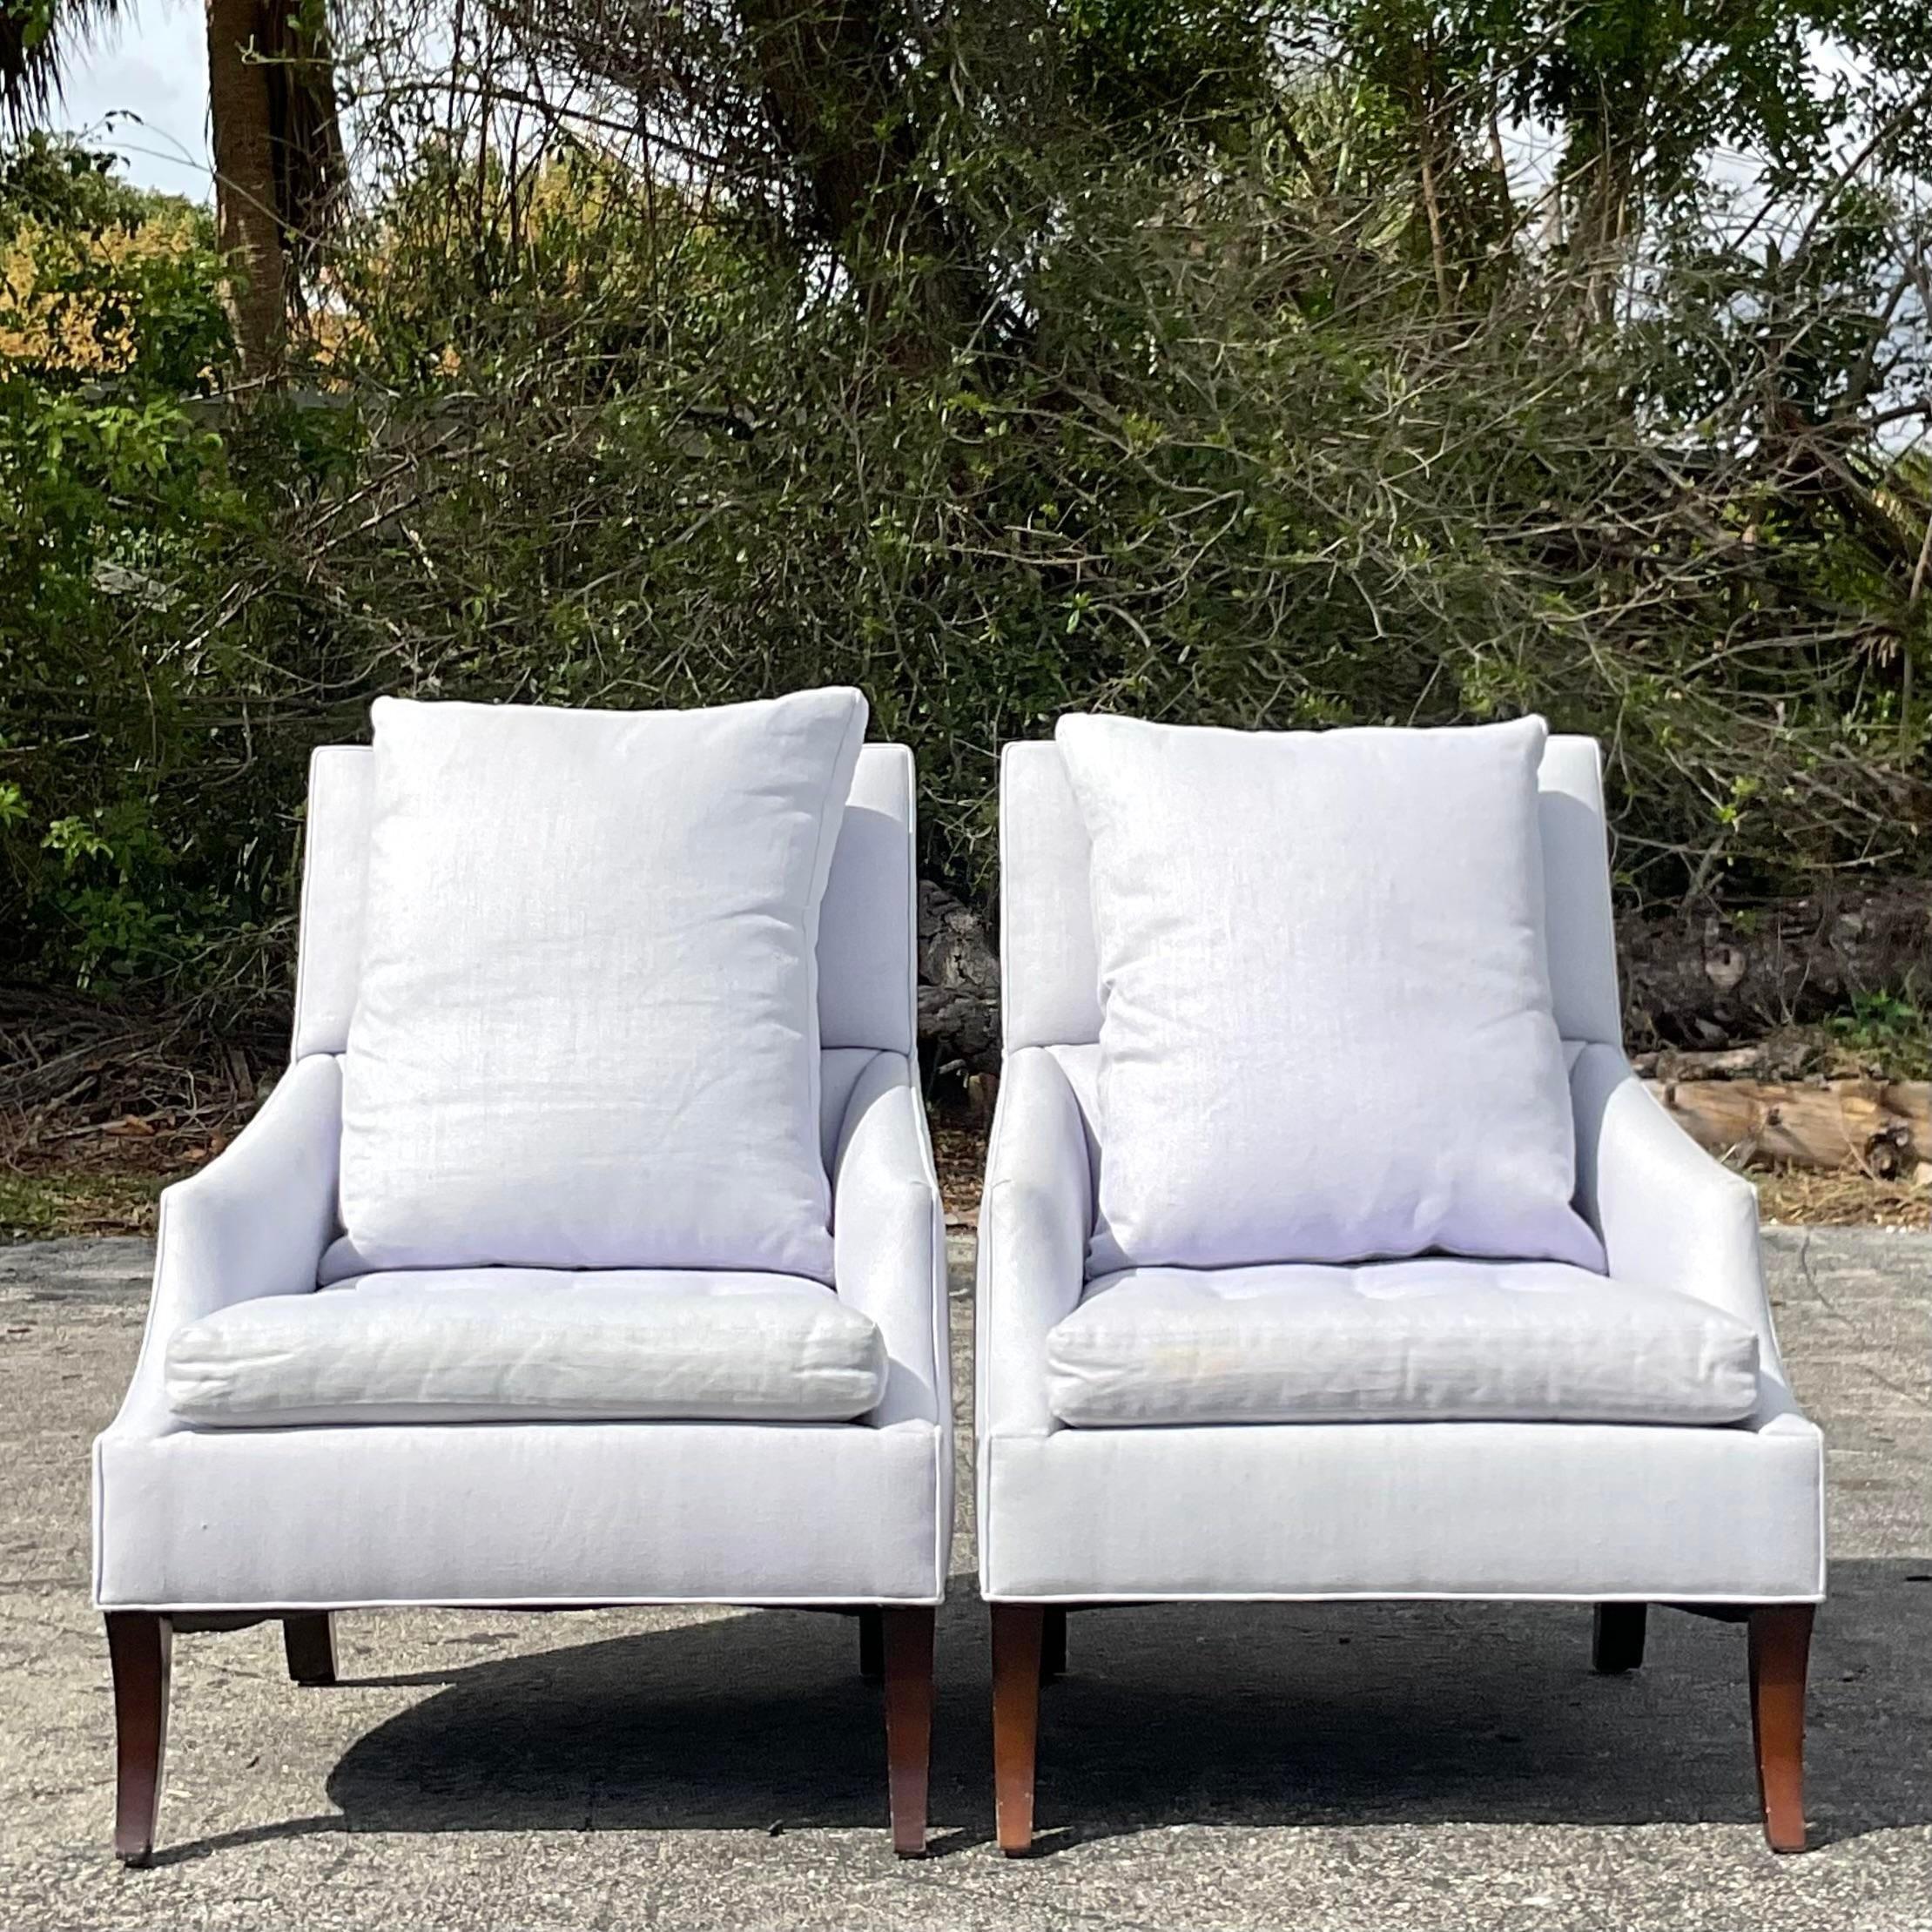 Vintage Boho R. Jones Lounge Chairs - a Pair For Sale 1